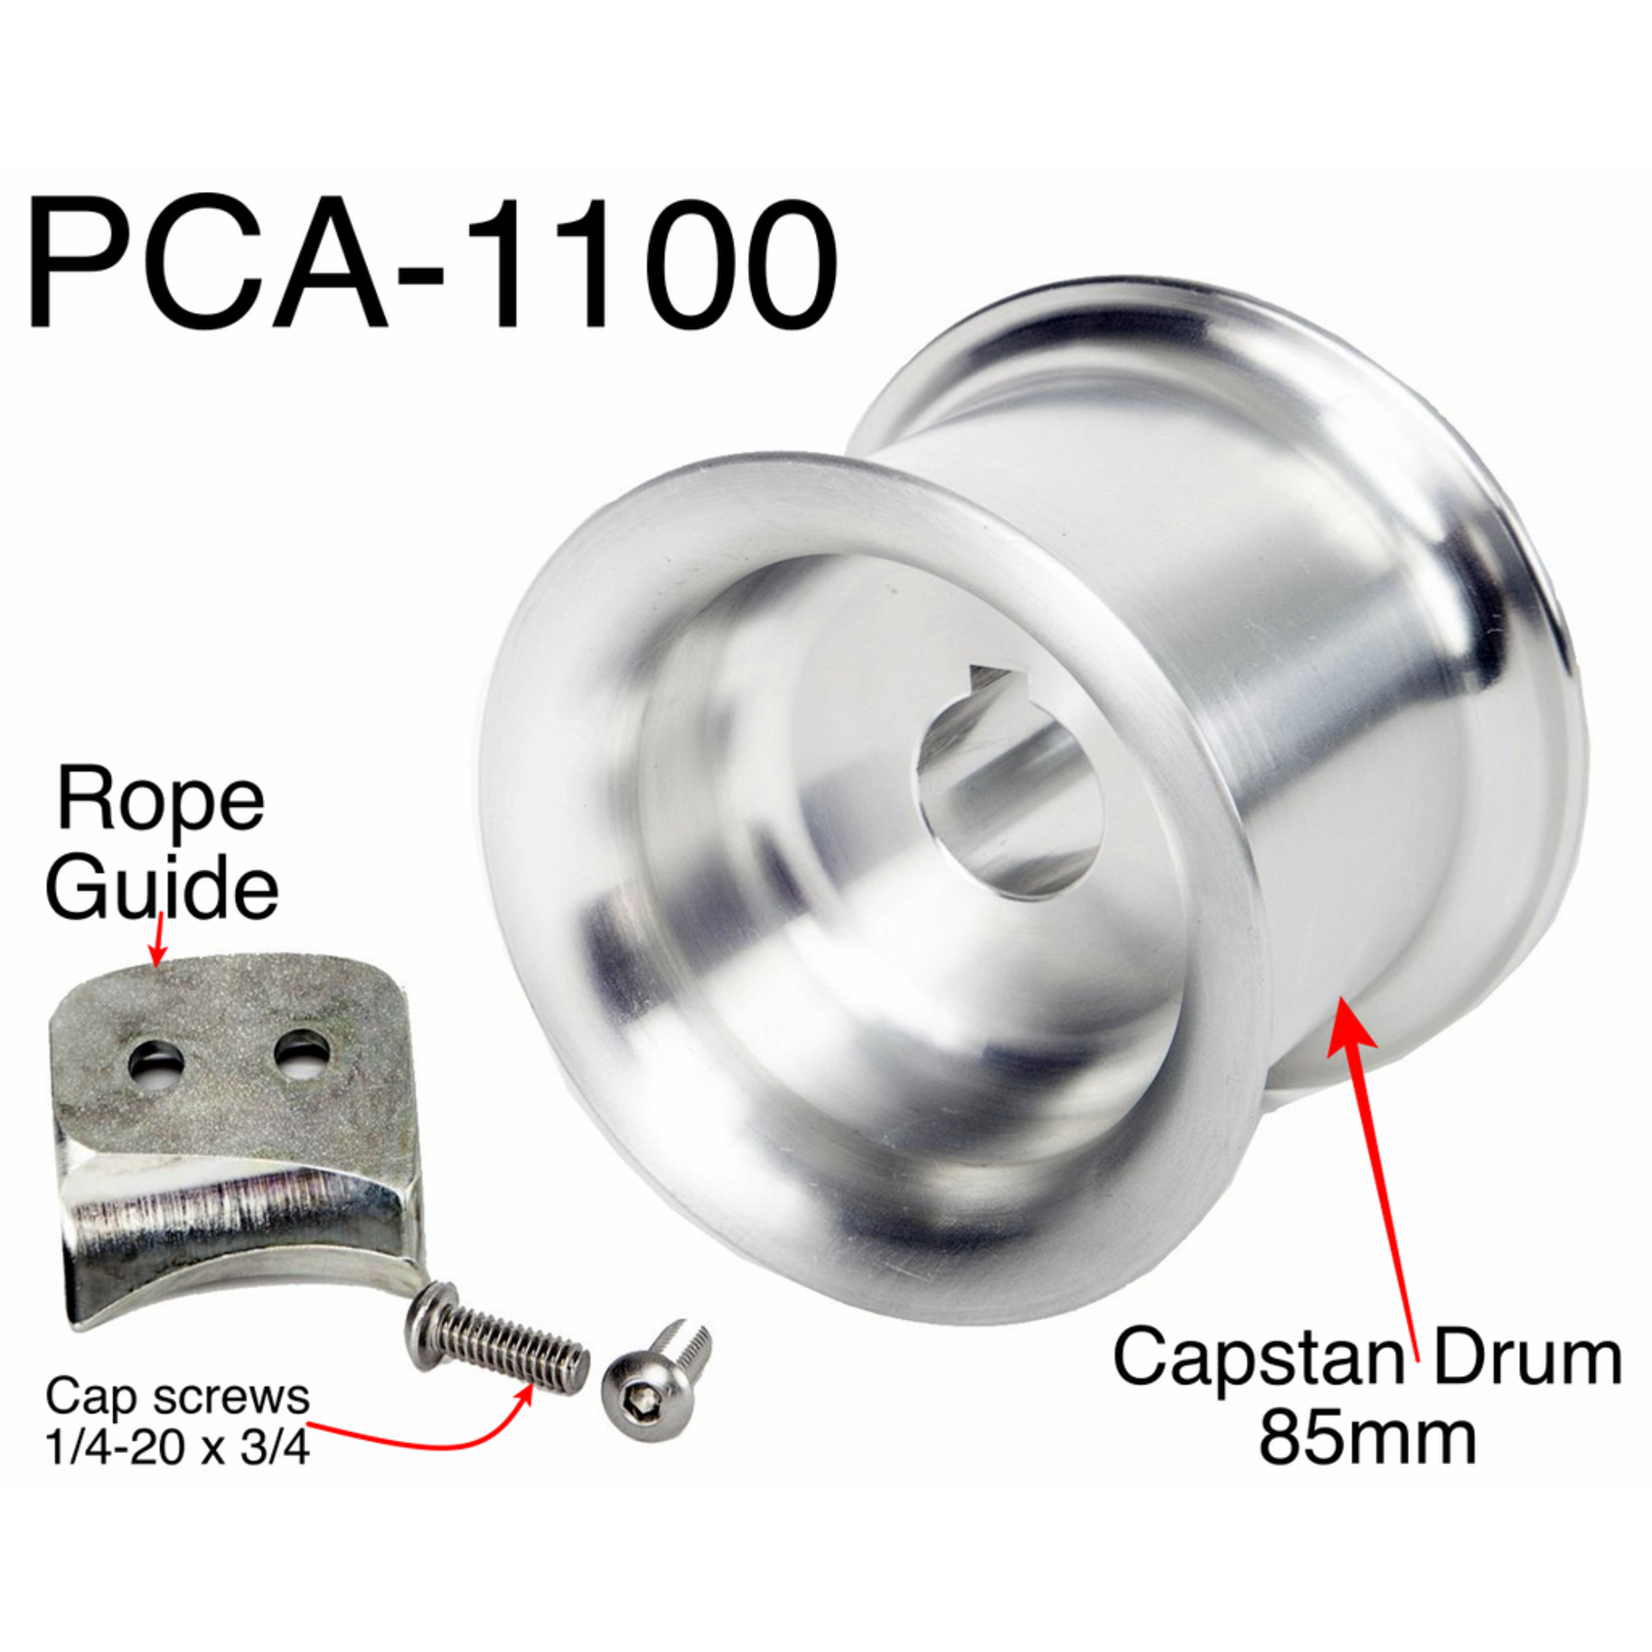 PORTABLE WINCH CO. Capstan Drum 85mm with Rope Guide And SS Screws